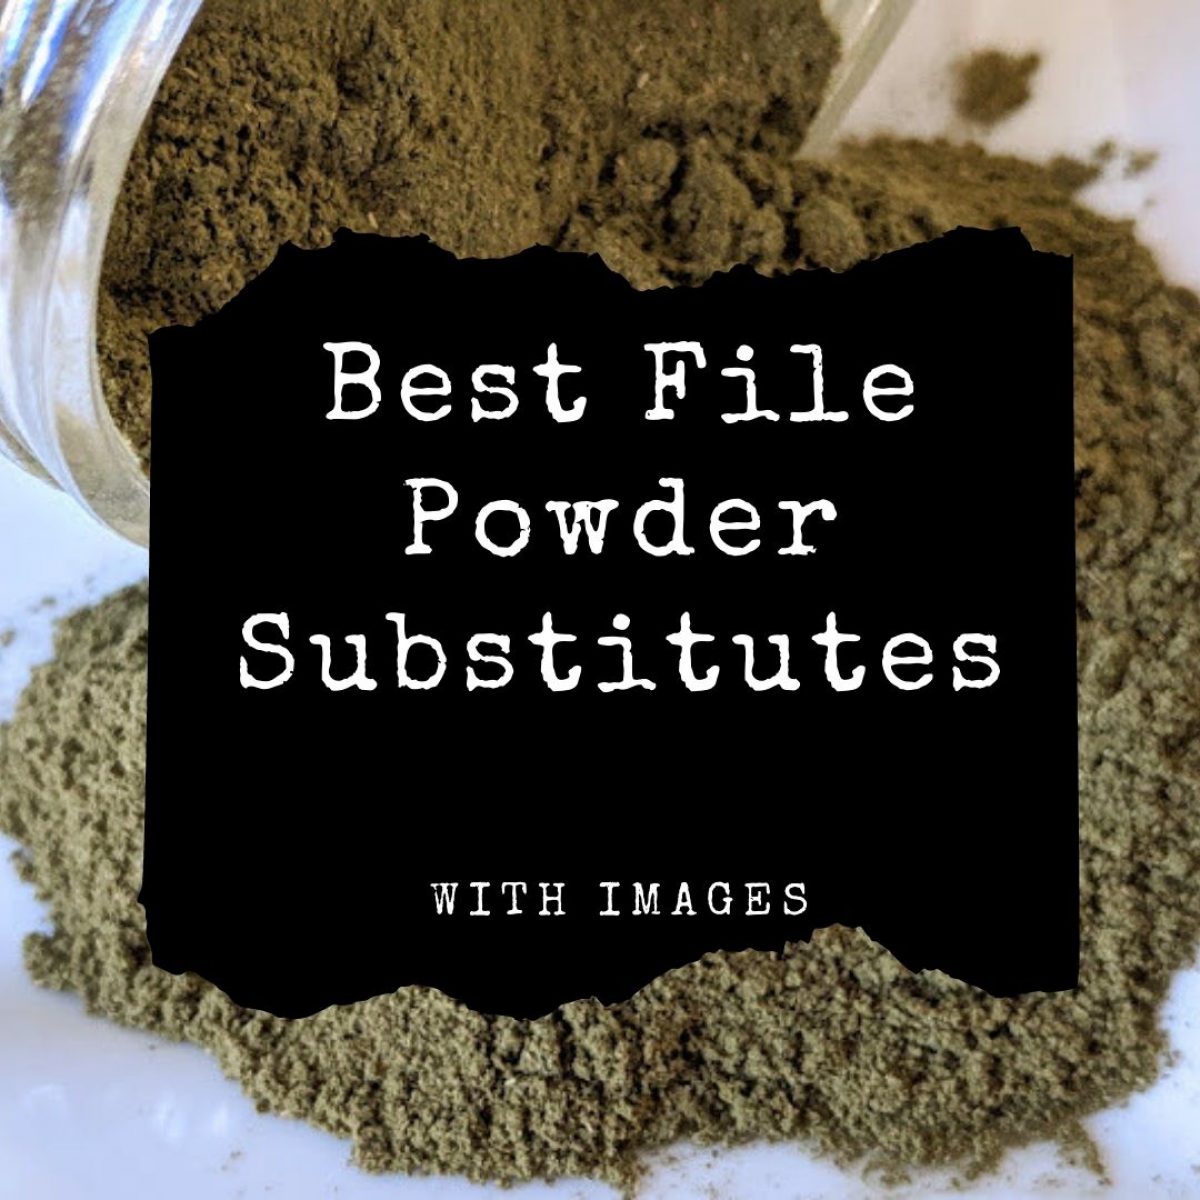 What Is File Powder?